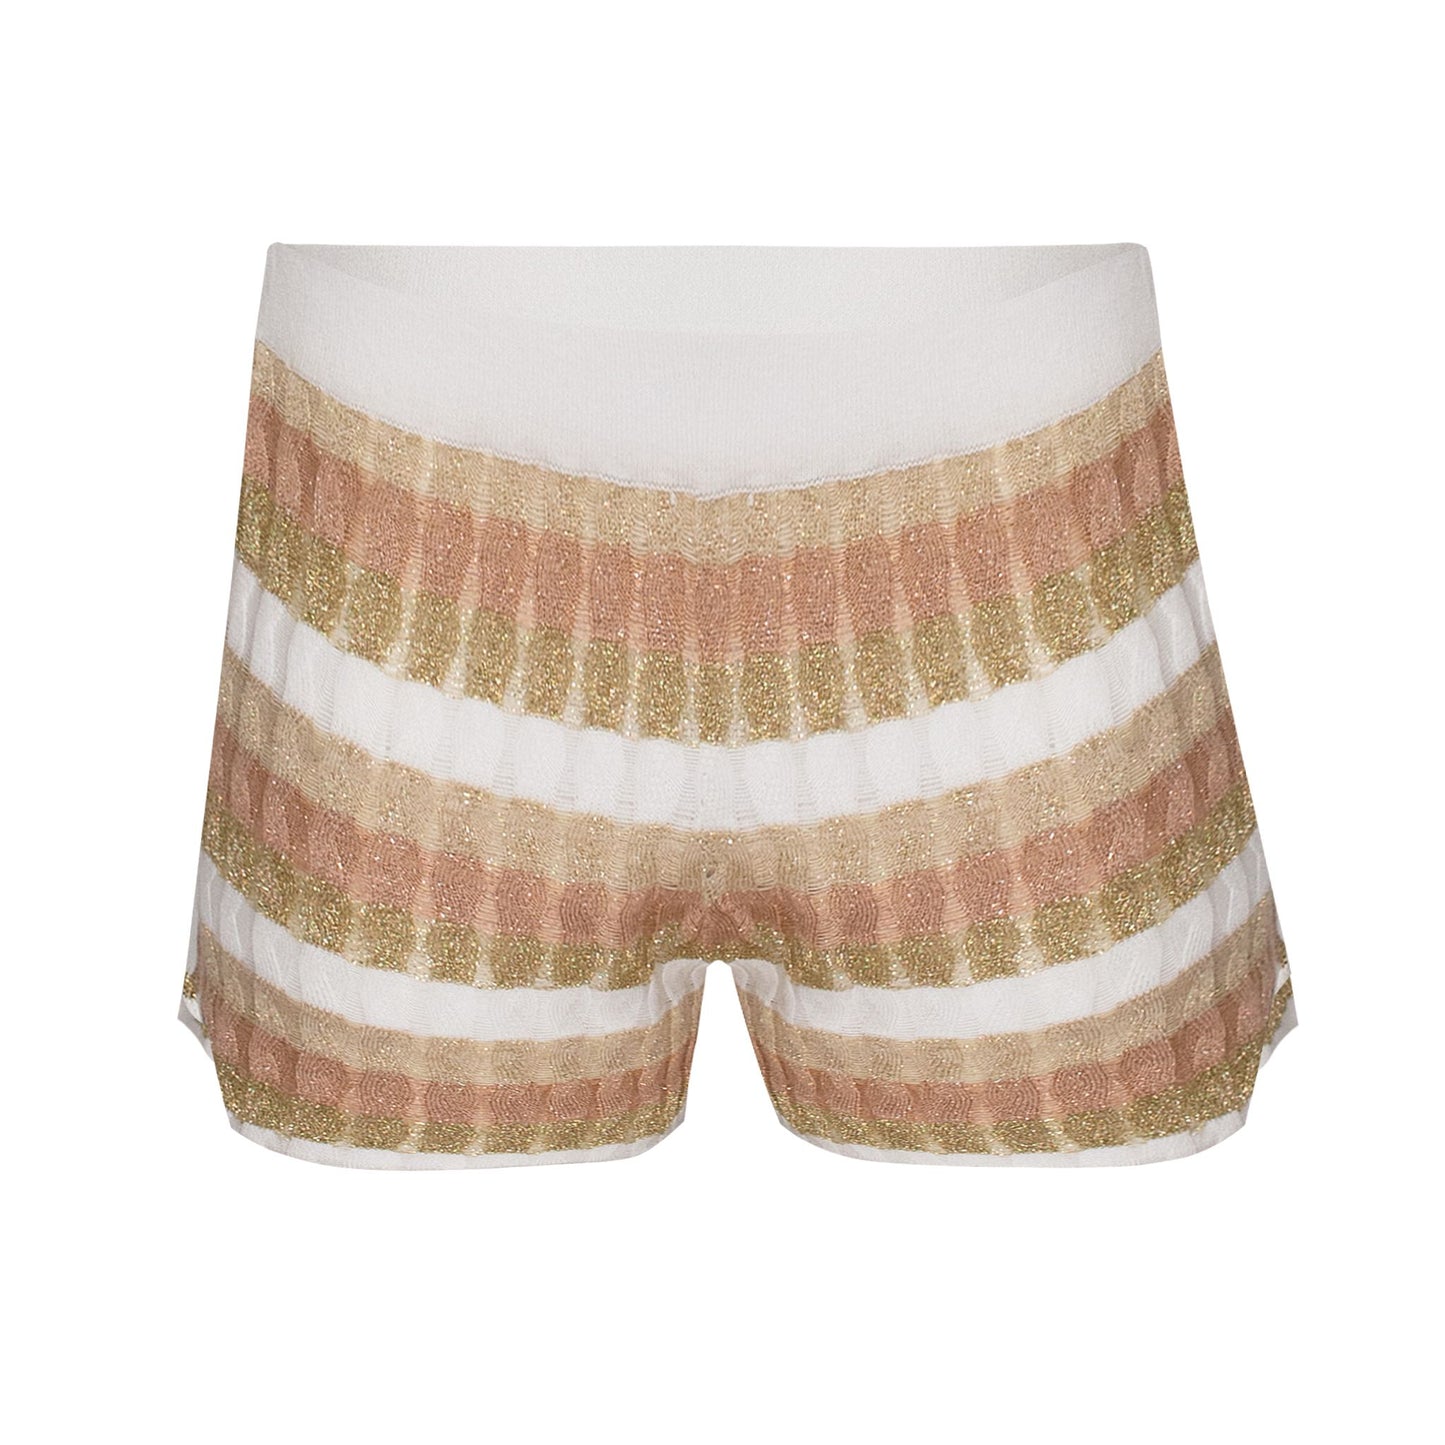 Load image into Gallery viewer, Shorts in Racking Knit White/Gold/Peach/Beige
